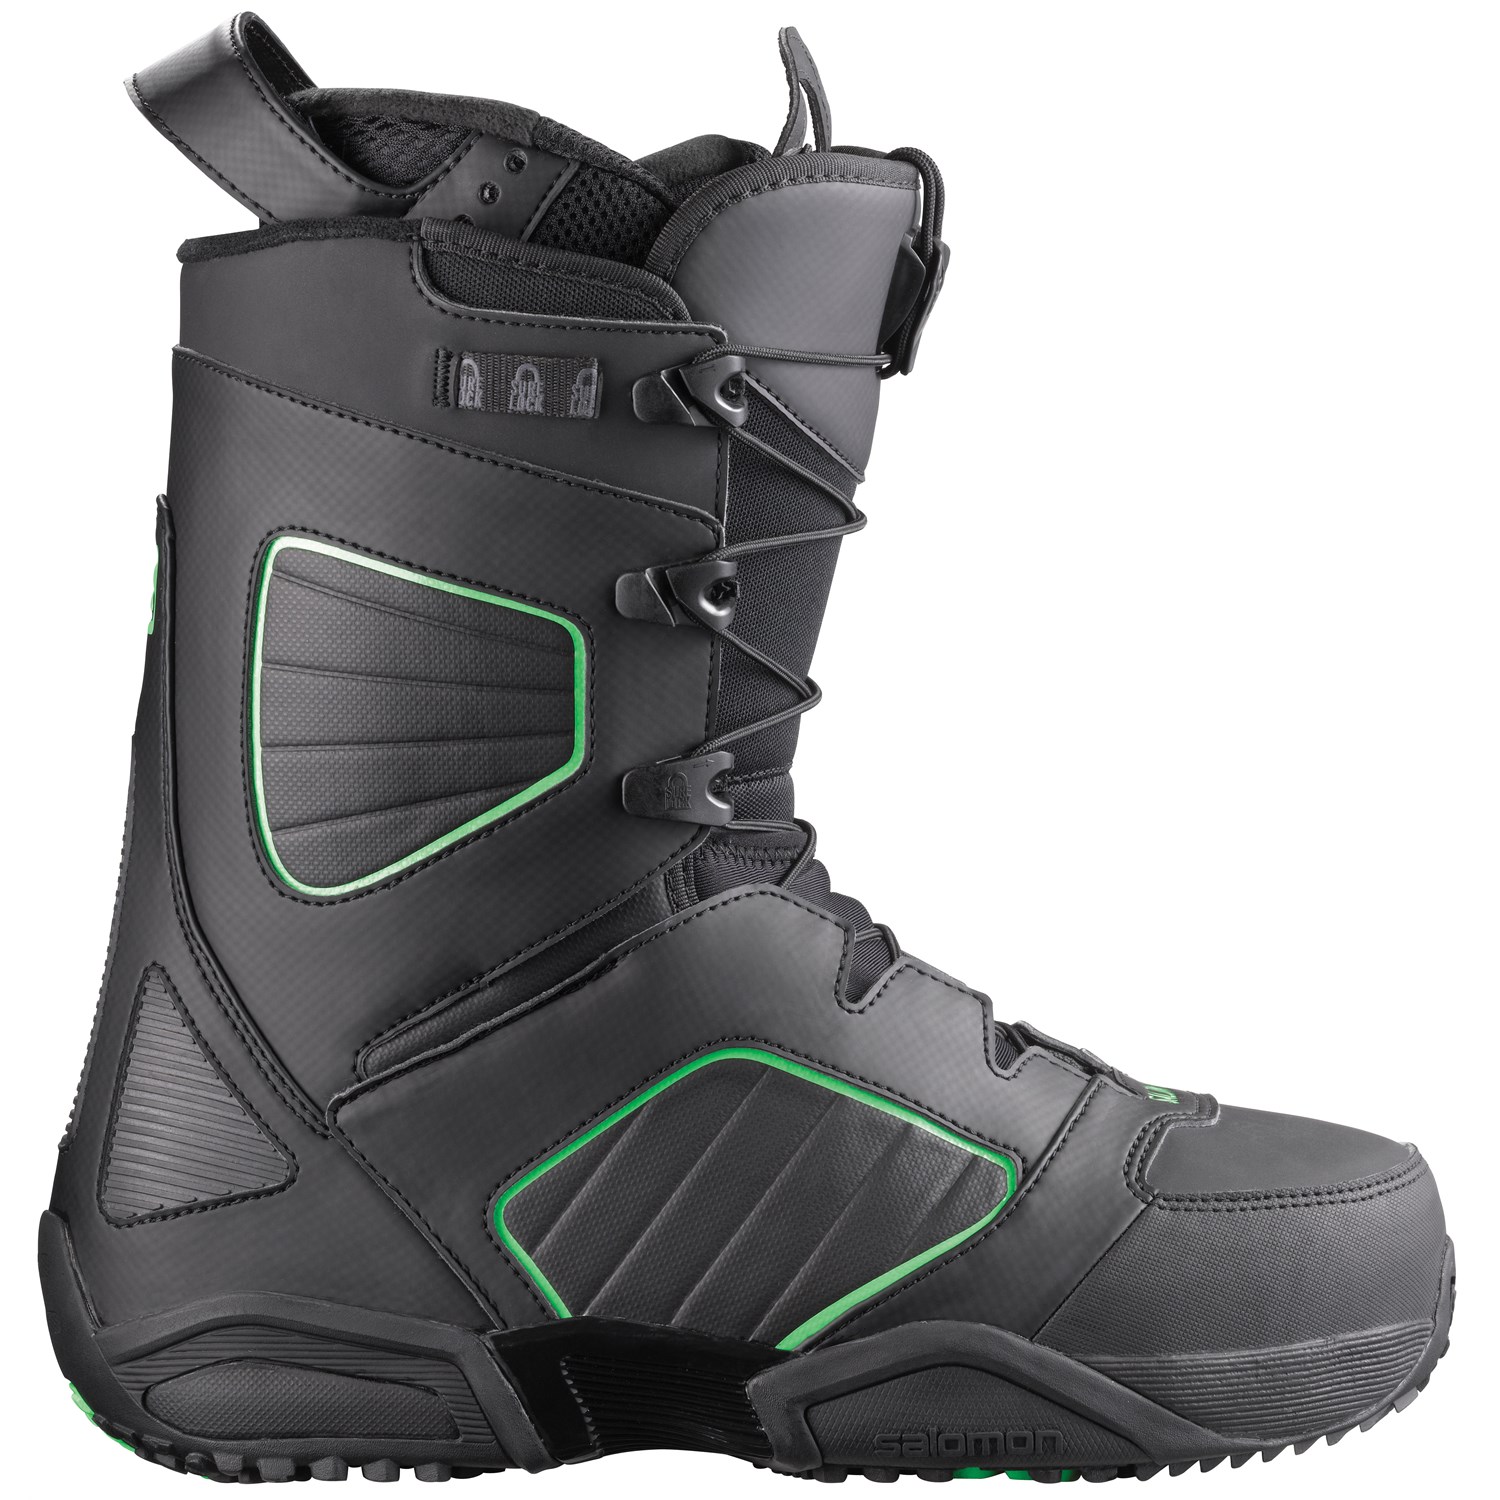 Synapse Snowboard Boots |